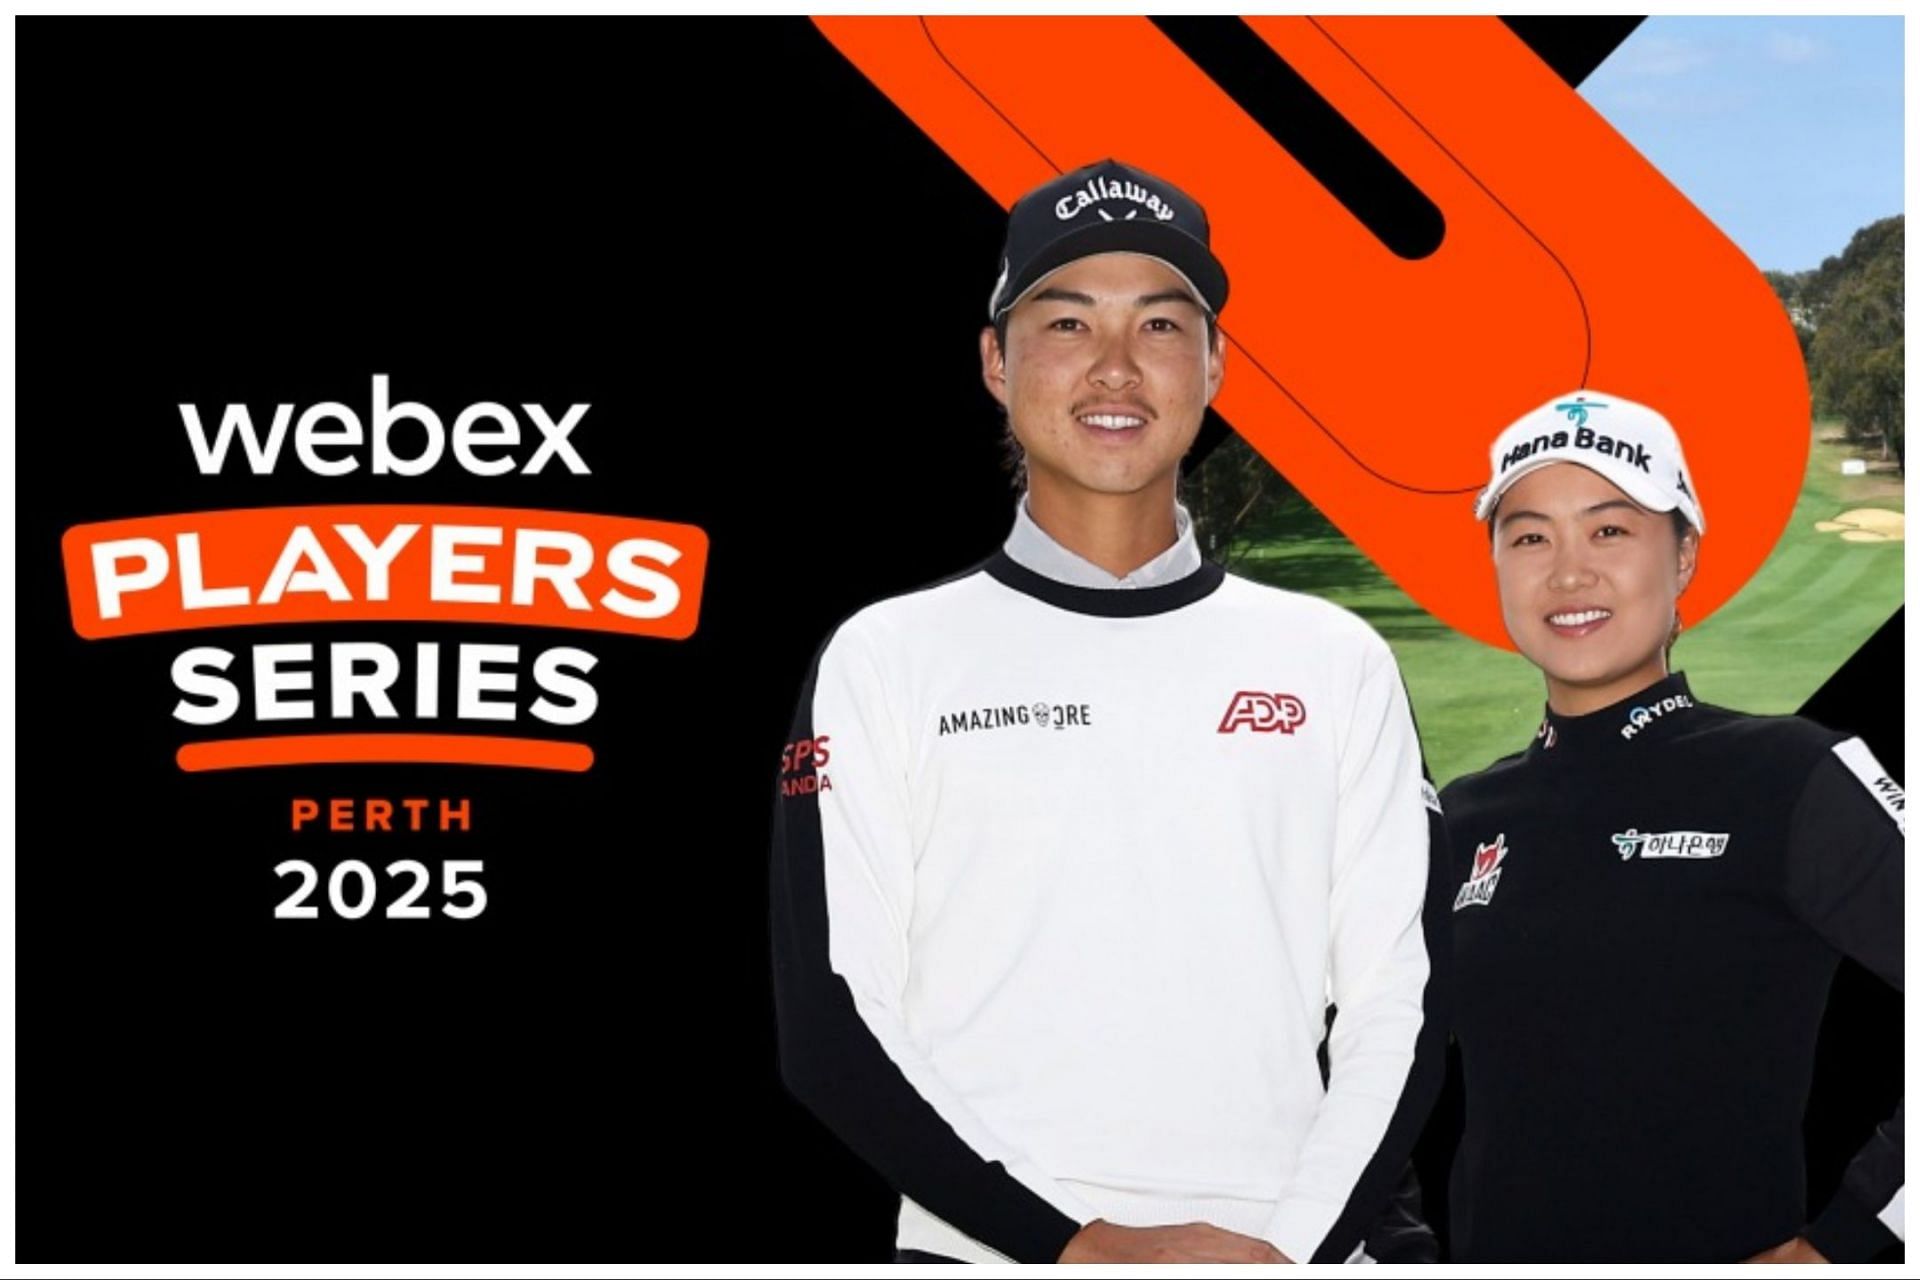 Minjee Lee and Min Woo Lee will co-host the Webex Players Series Perth, starting from 2025 (Image via PGA Tour Australia)